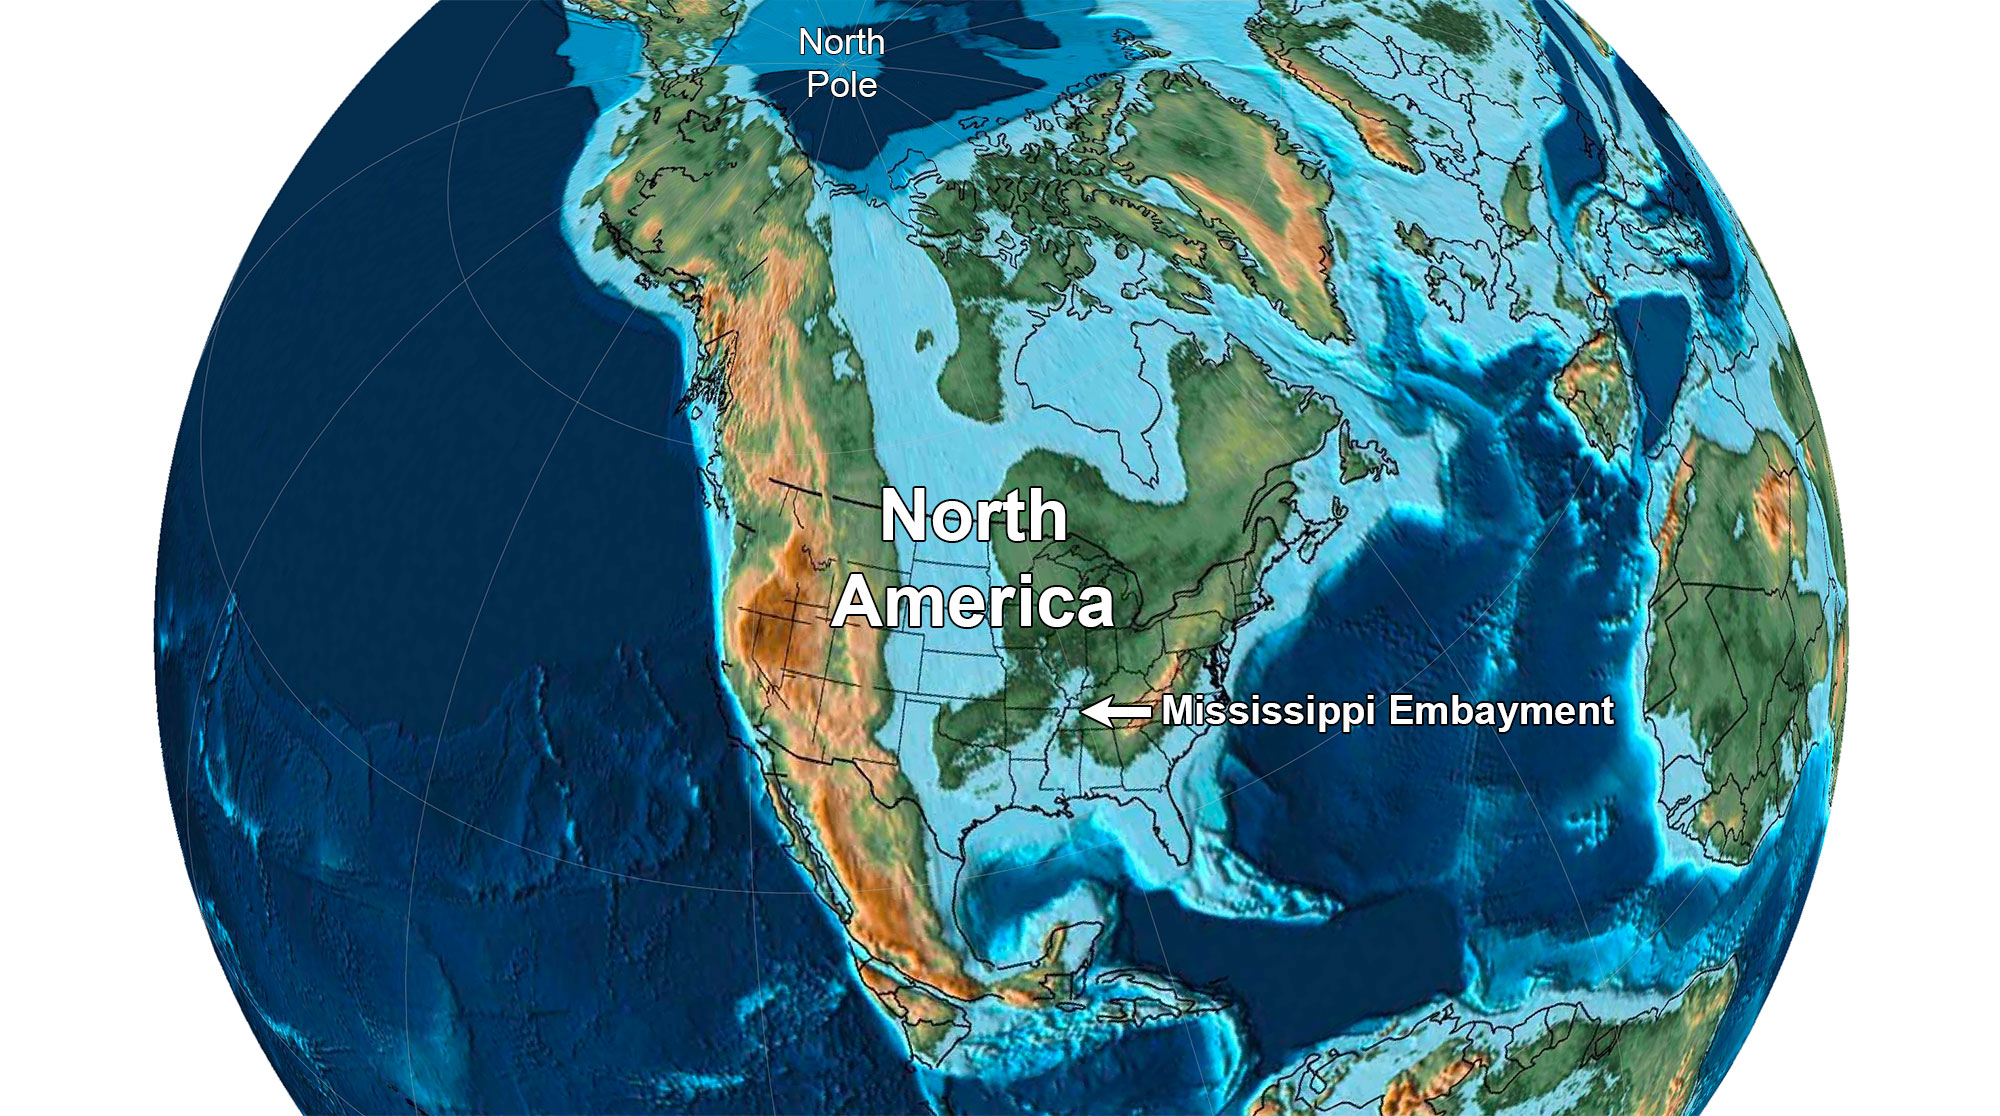 Reconstruction of North America about 75 million years ago during the Late Cretaceous showing the flooded Mississippi Embayment.